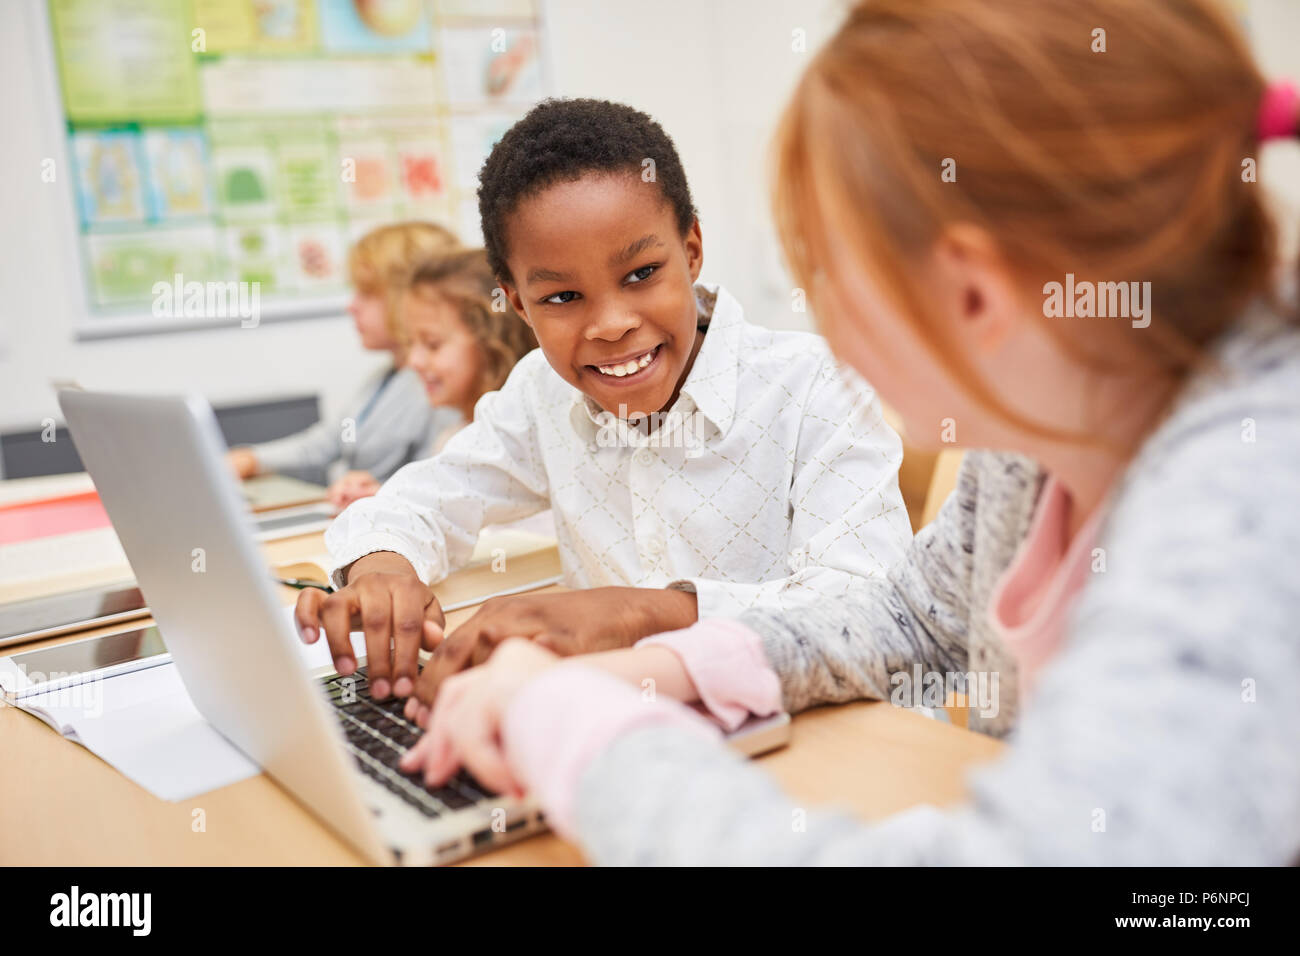 Children learn computer science together at laptop Computer in elementary school Stock Photo